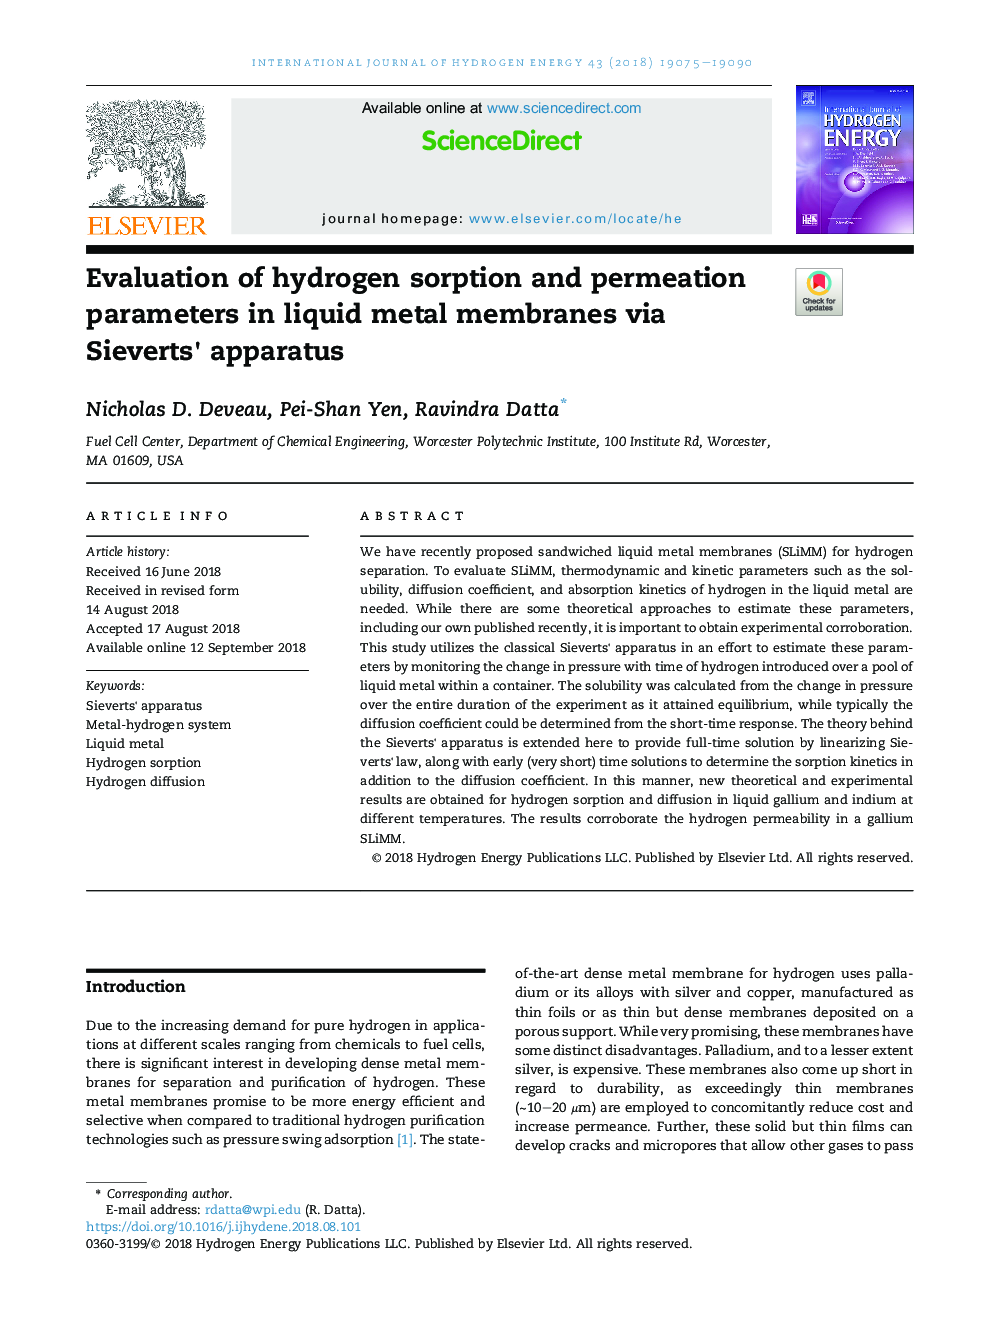 Evaluation of hydrogen sorption and permeation parameters in liquid metal membranes via Sieverts' apparatus